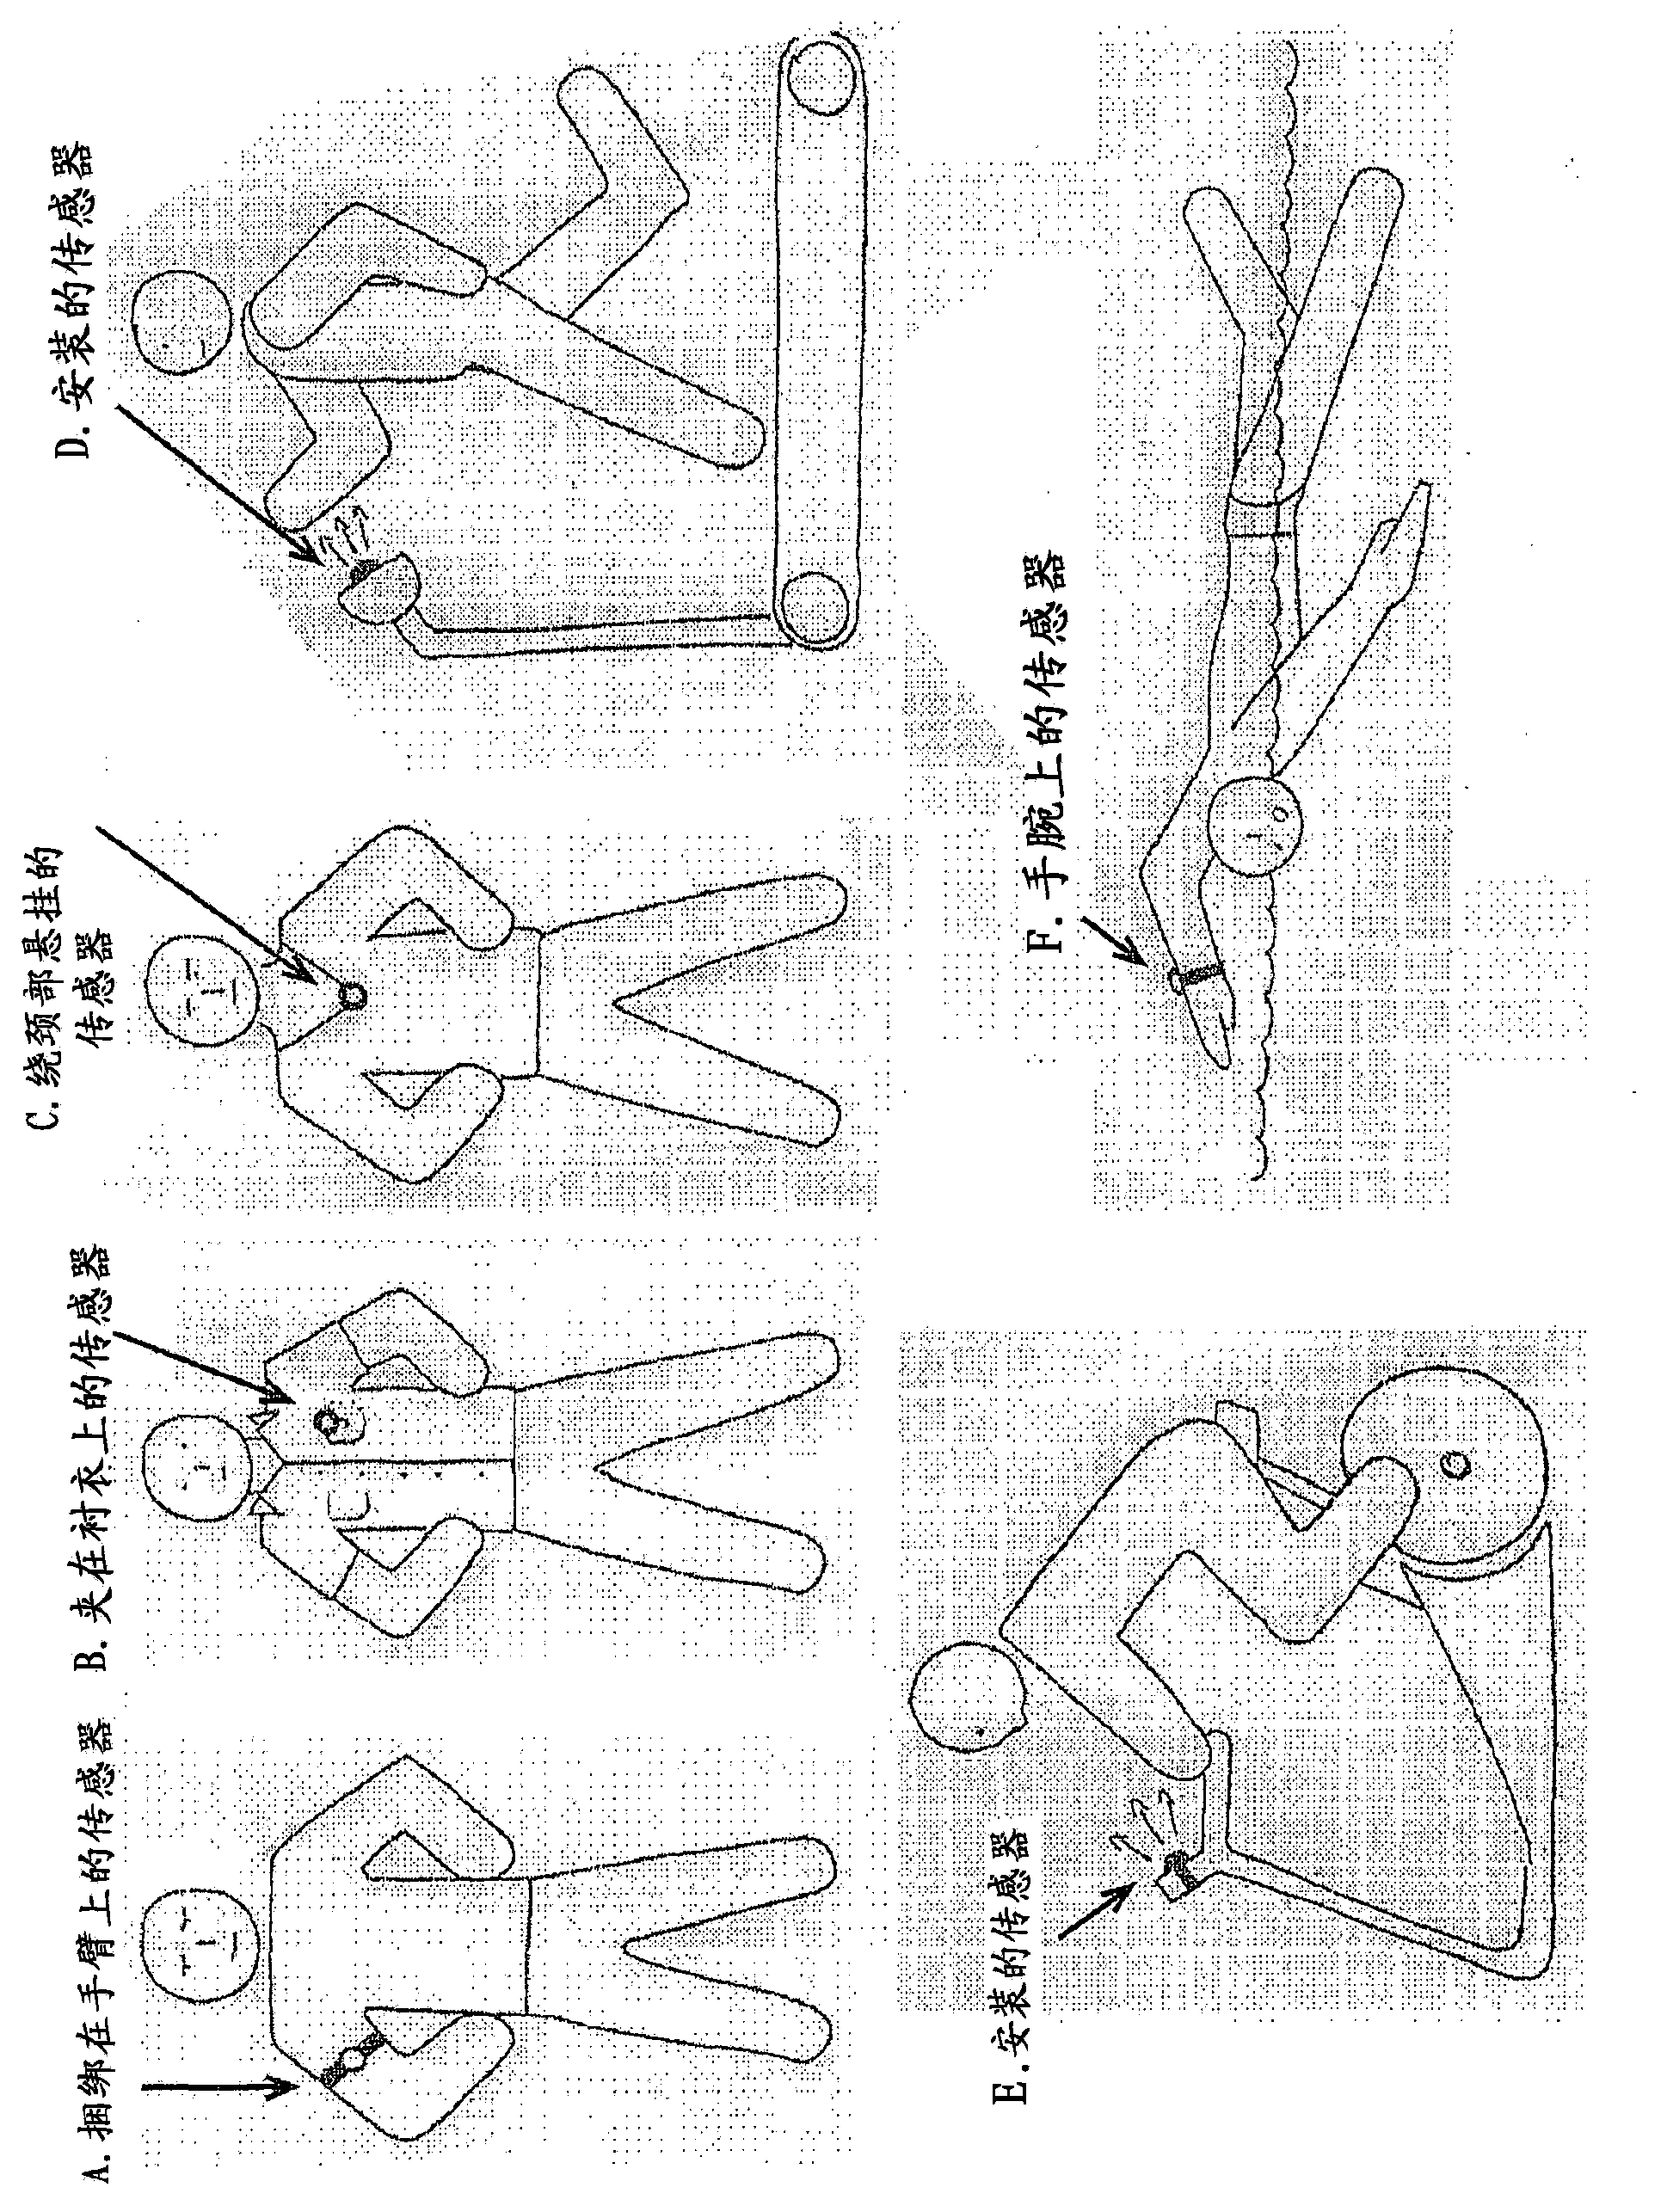 System and method for monitoring cardiorespiratory parameters